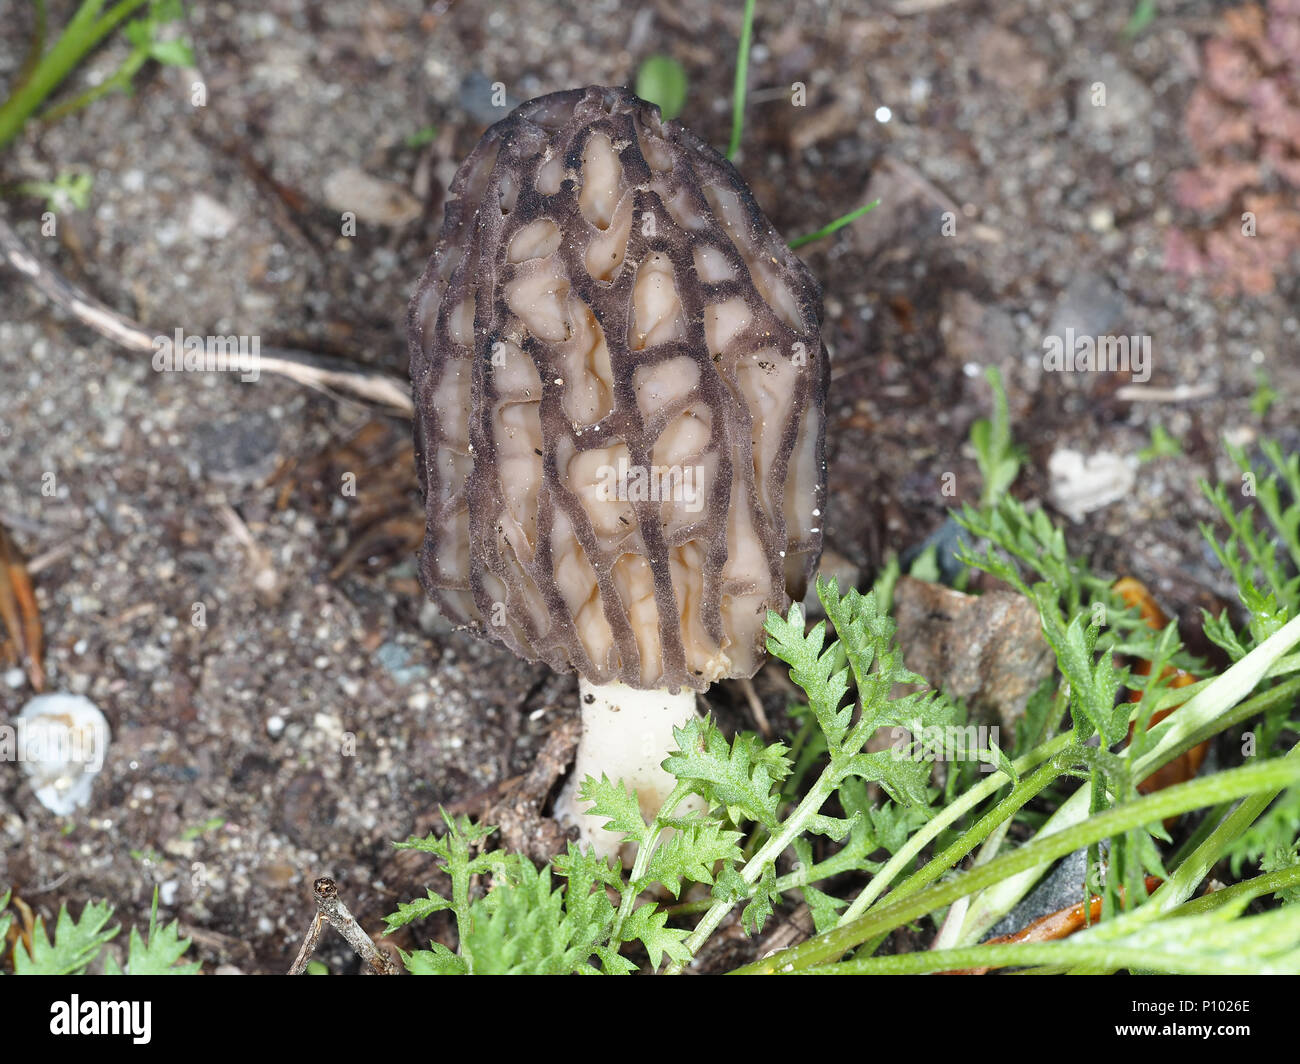 Wild black morel mushroom (most likely Morchella brunnea) growing in Central Washington state, USA Stock Photo